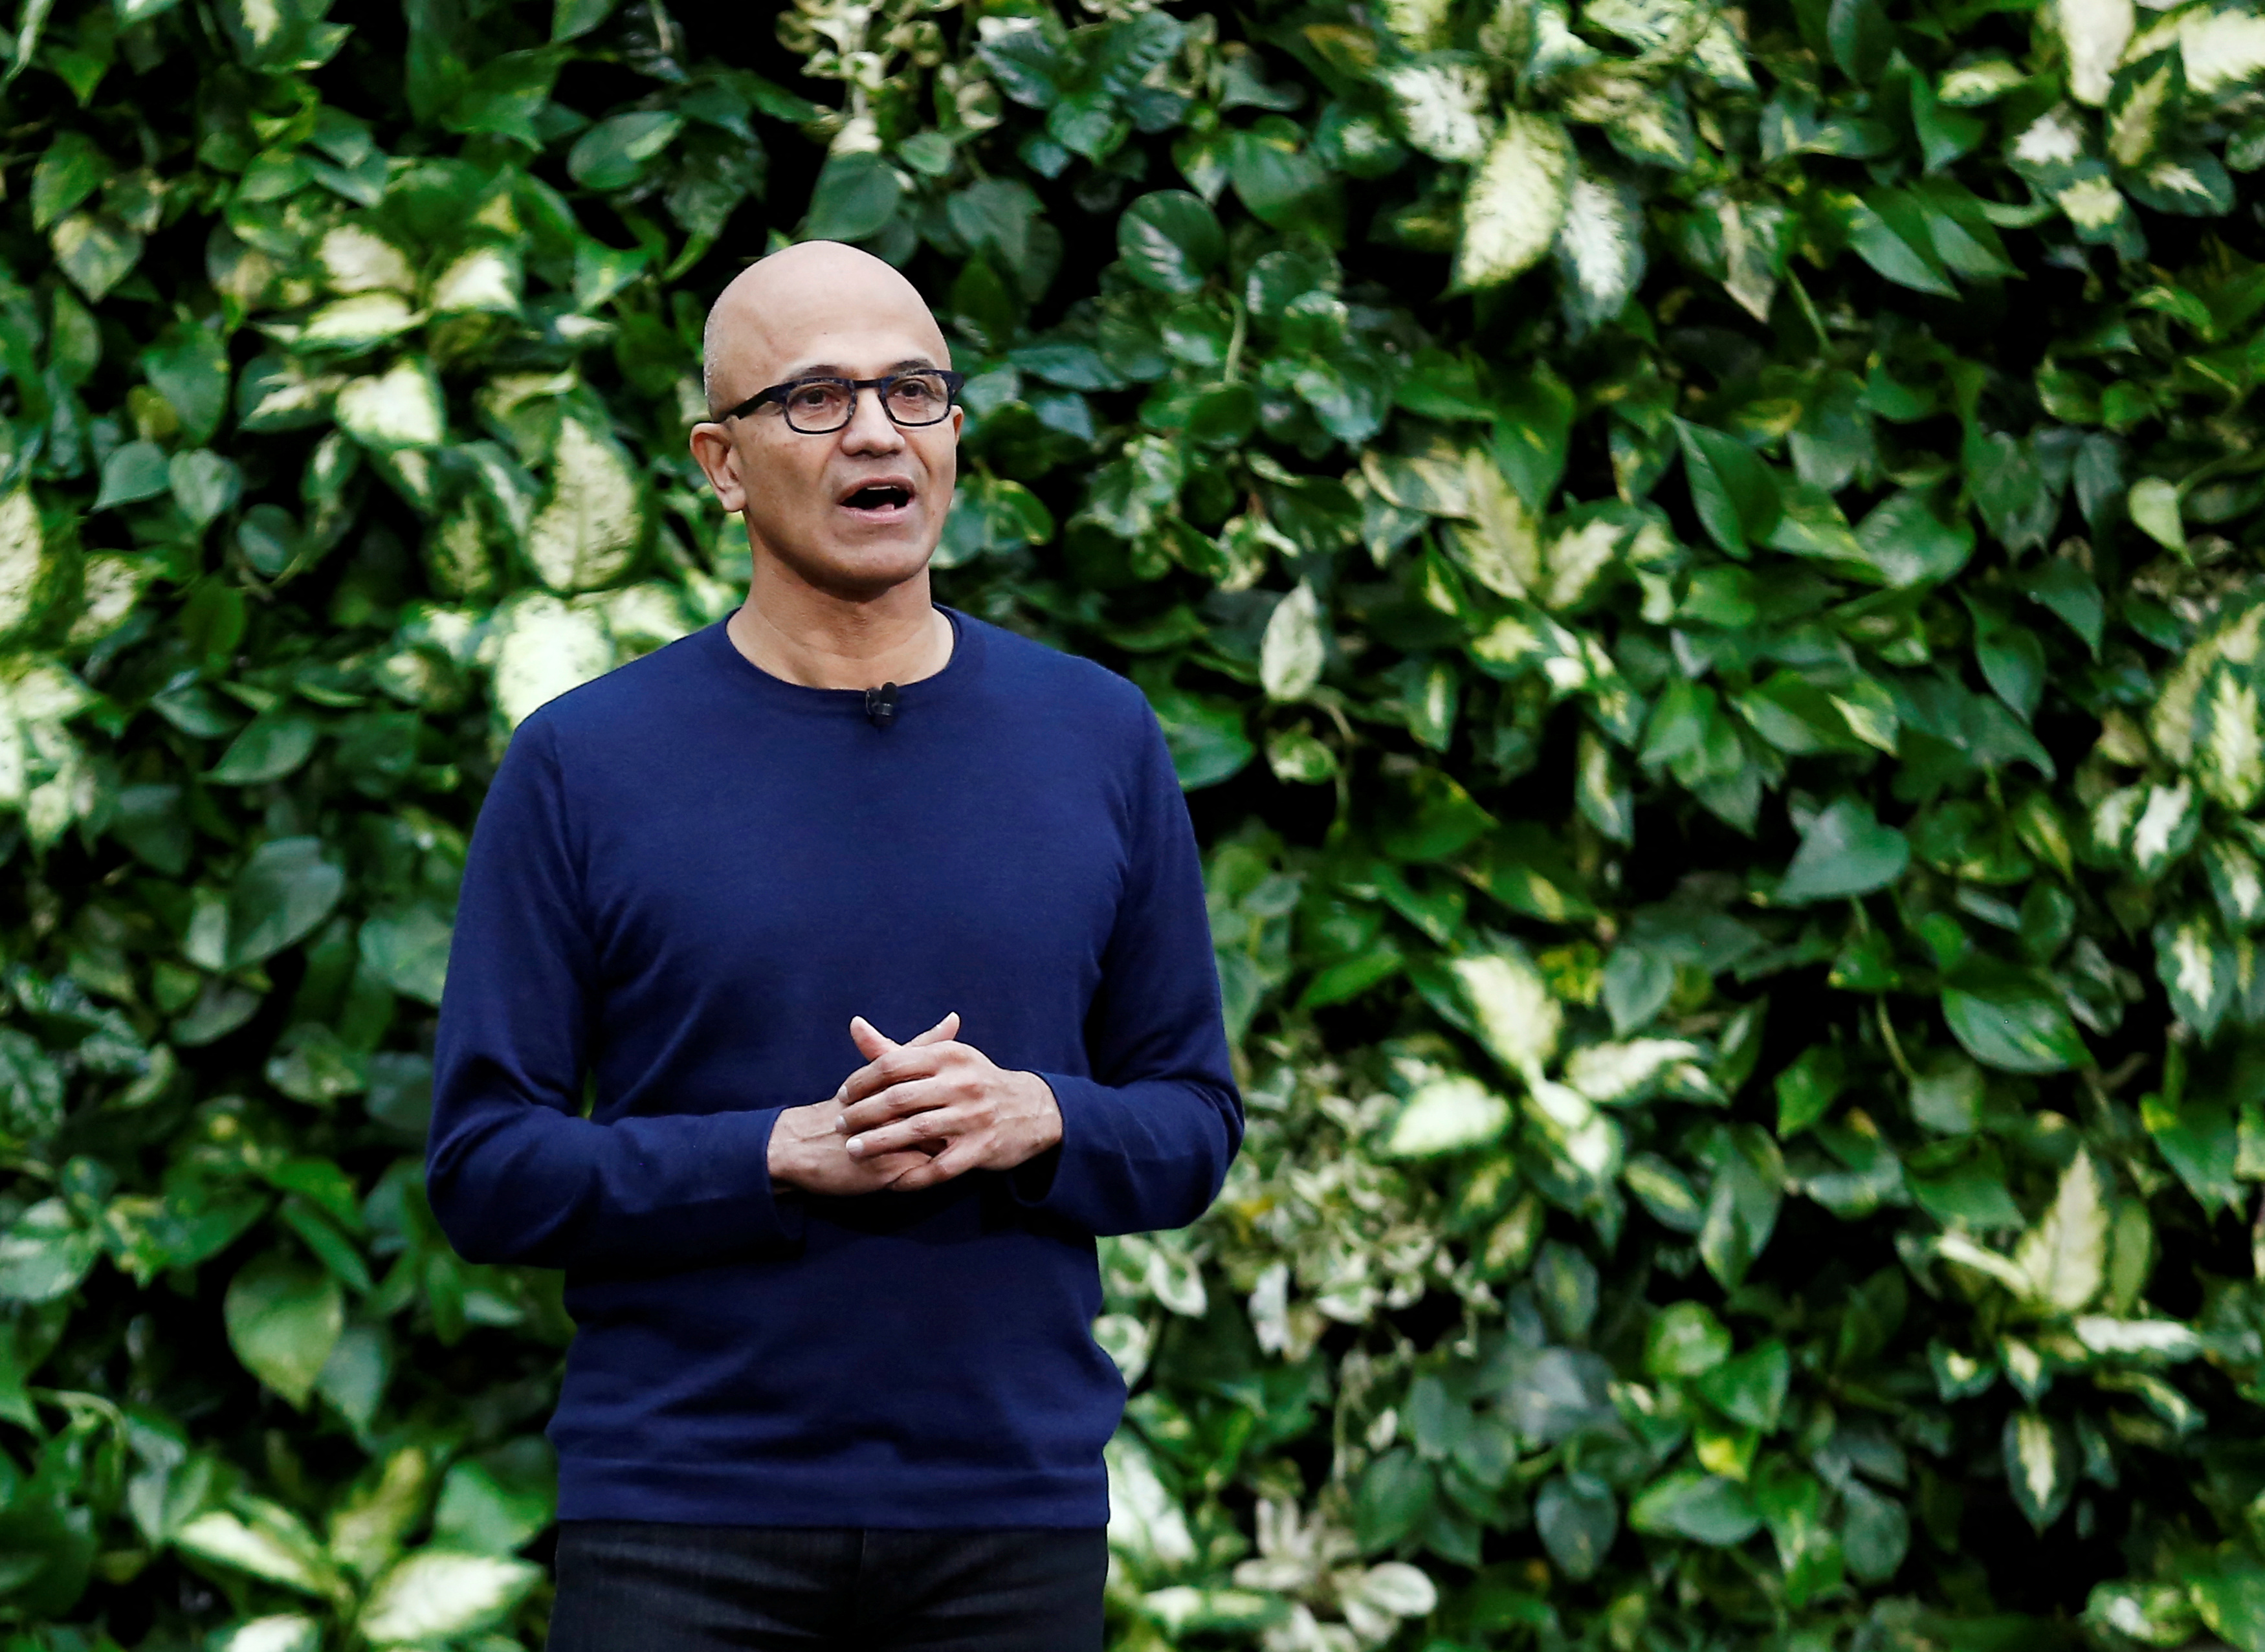 Microsoft CEO Nadella speaks as the company announces plans to be carbon negative by 2030 and to negate all the direct carbon emissions ever made by the company by 2050 at their campus in Redmond